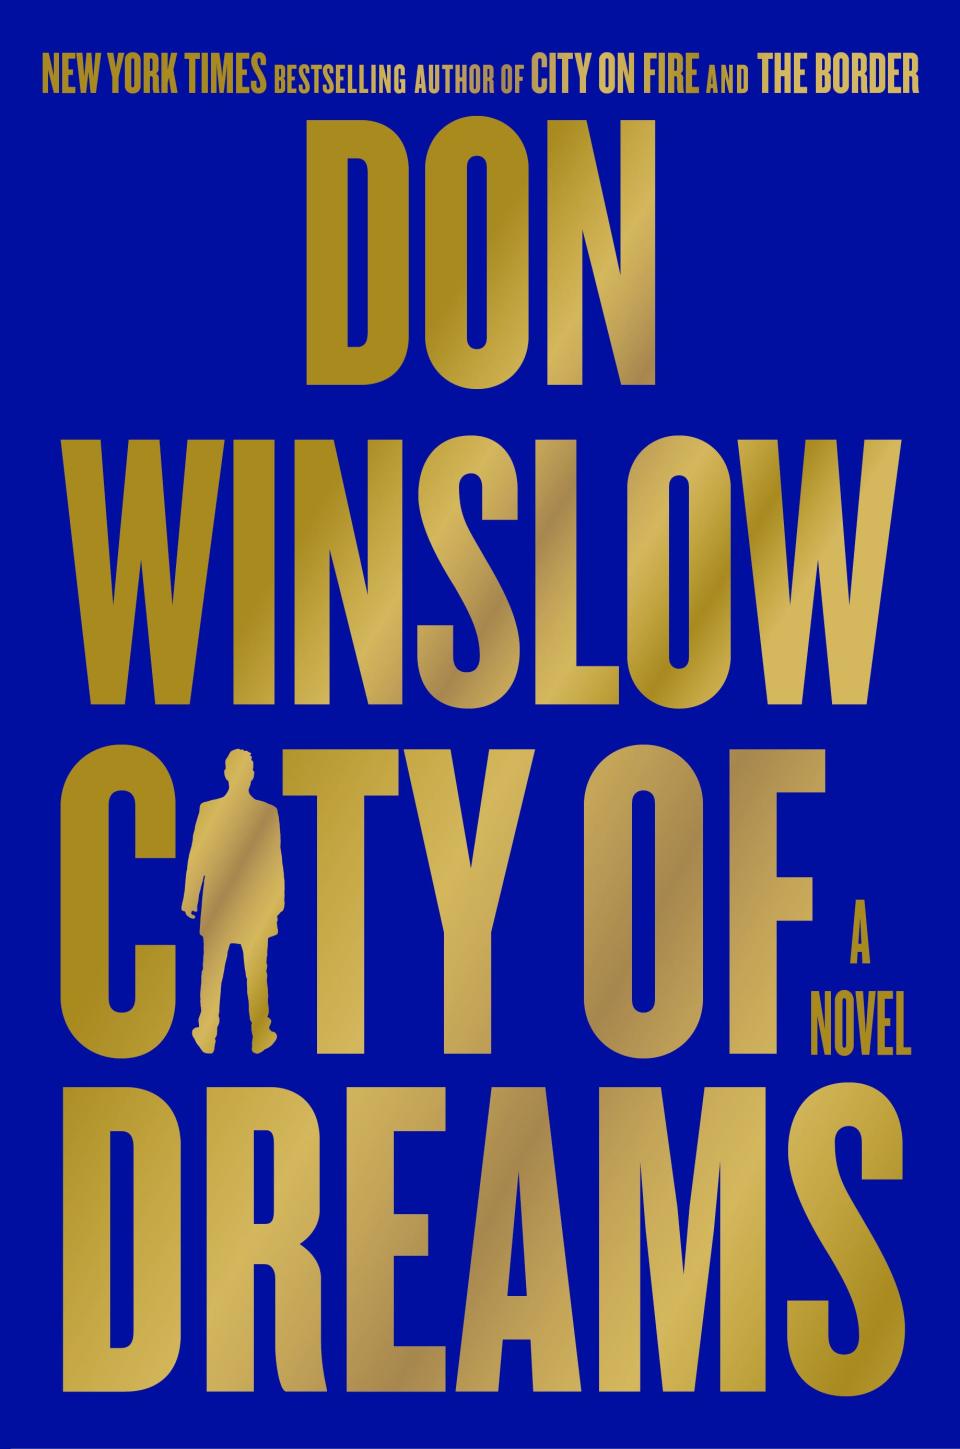 "City of Dreams" is the second in the Danny Ryan trilogy by Don Winslow.